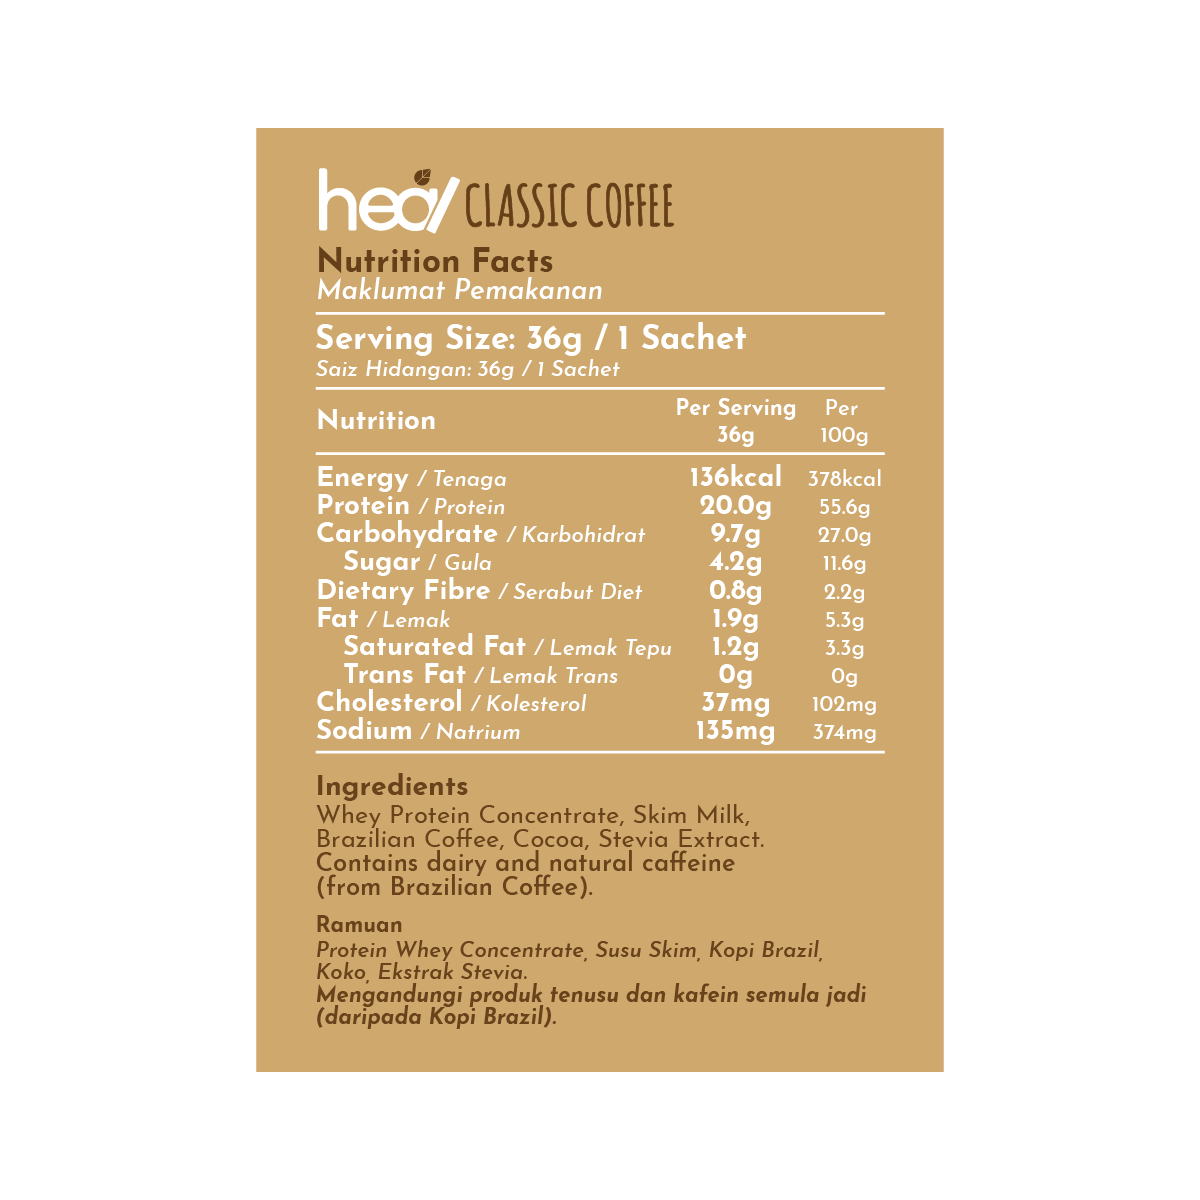 [Subscription Plan] Heal Classic Coffee Protein Shake, 16 Sachets (36g)